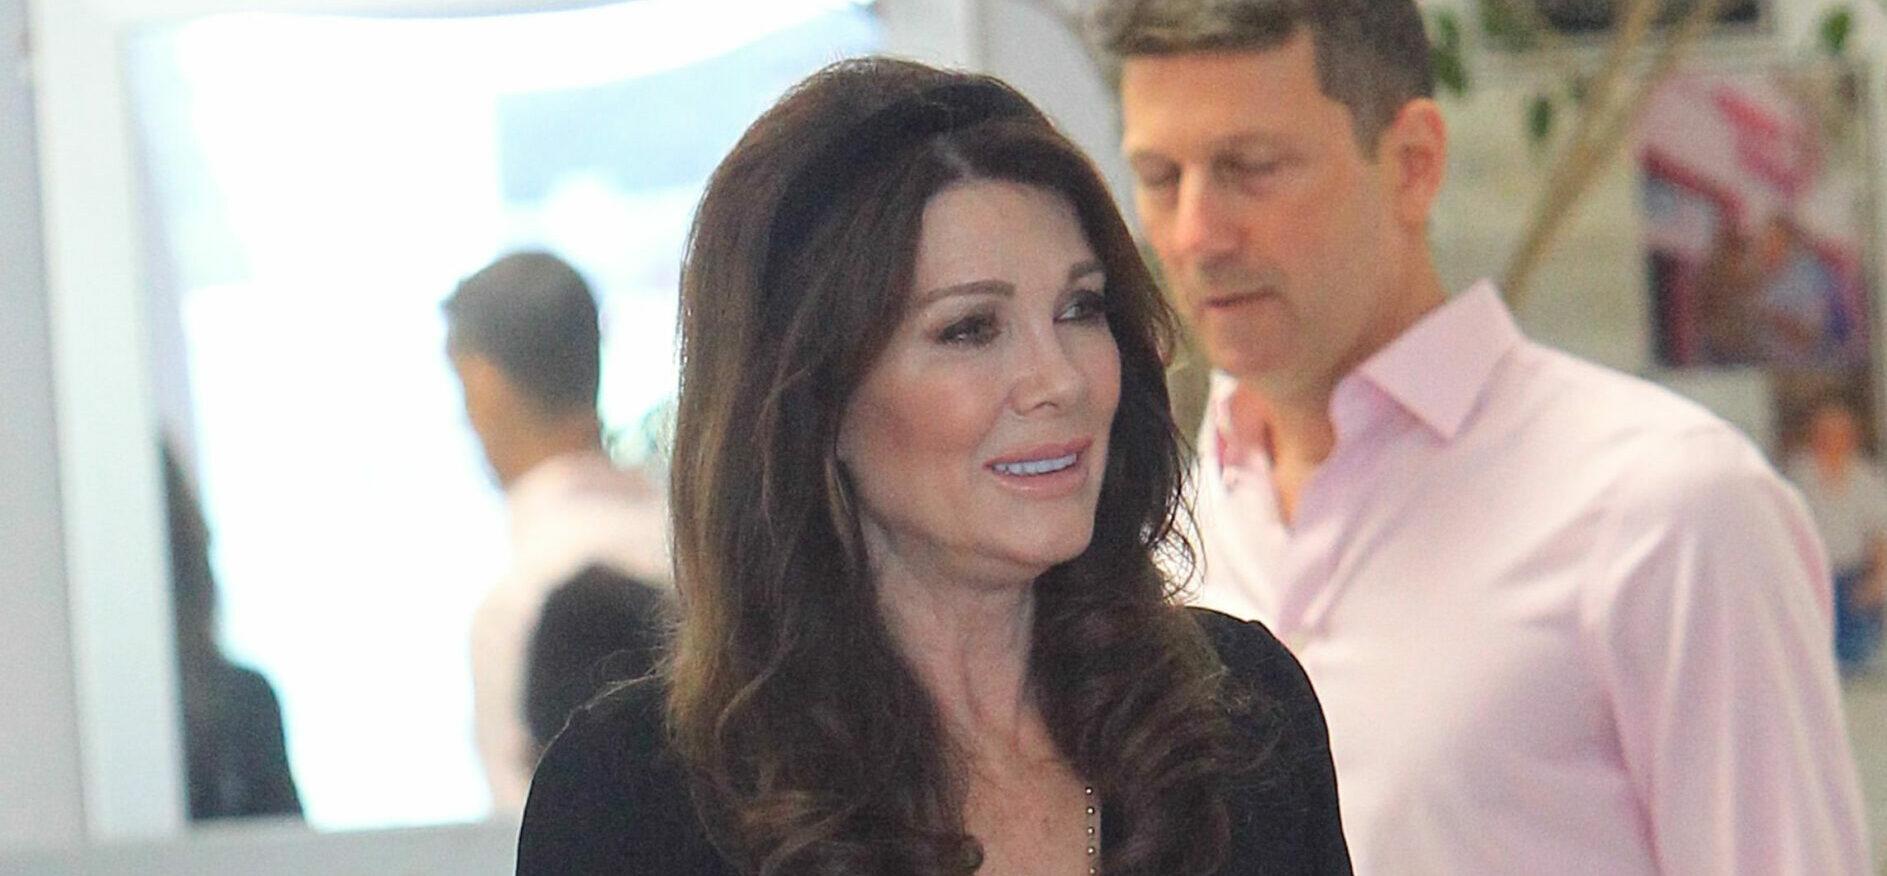 Lisa Vanderpump out and about